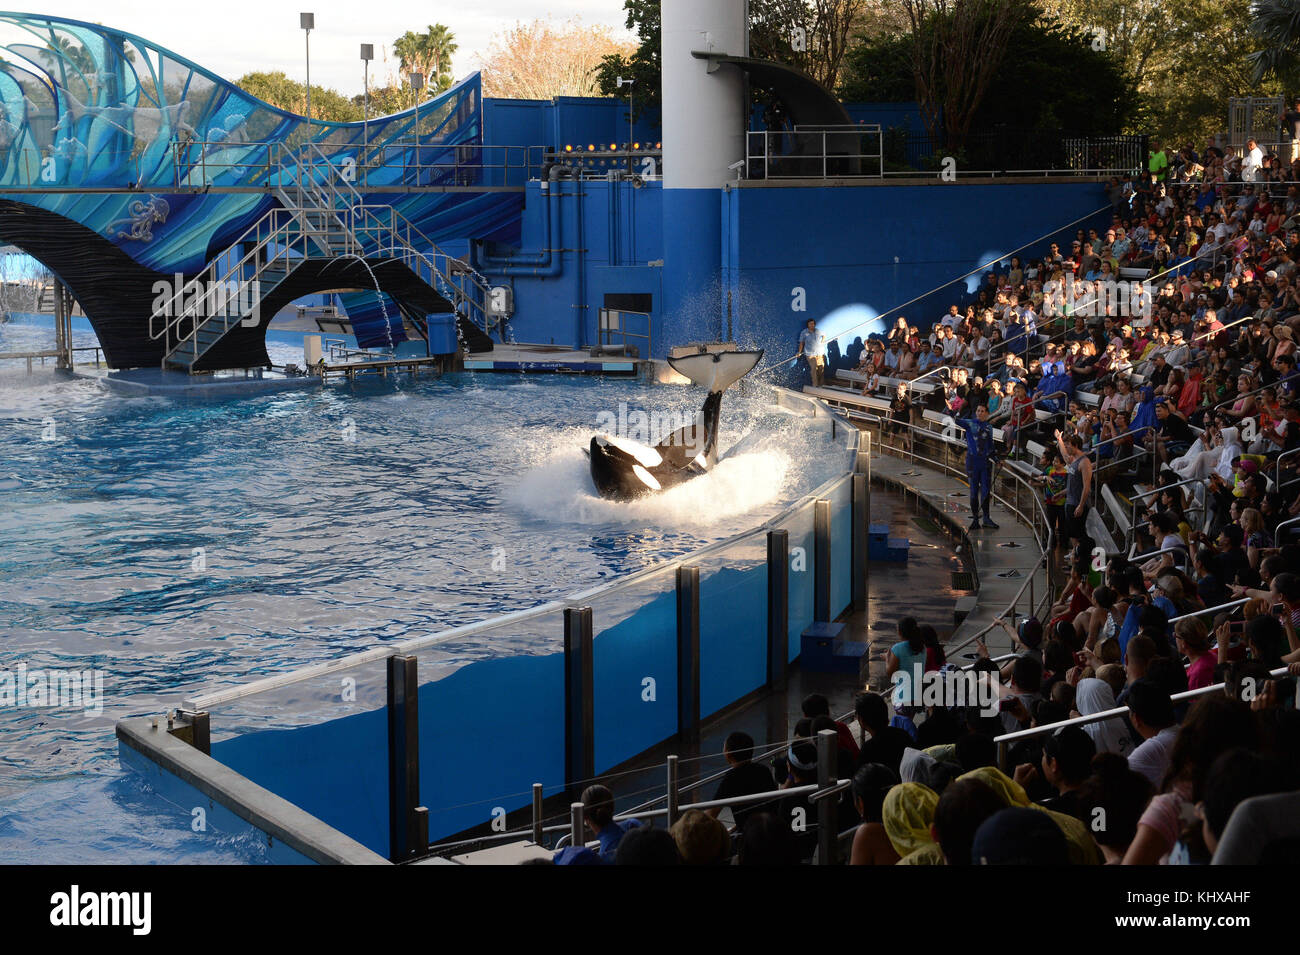 ORLANDO, FL - DECEMBER 20: Besieged theme park SeaWorld has launched its first major PR attack against Blackfish in an attempt to offset almost 12 months of damage caused by the chilling documentary, which chronicled the aquarium's 39-year treatment of killer whales in captivity.  Hit with cancellations from high-profile performers and school field trips, coupled with aggressive animal activist campaigns and a tarnished image, the Orlando-based marine park has placed full-page ads in eight of the country's largest newspapers, rationalizing their whale practices.  The 'Open Letter from SeaWorld Stock Photo